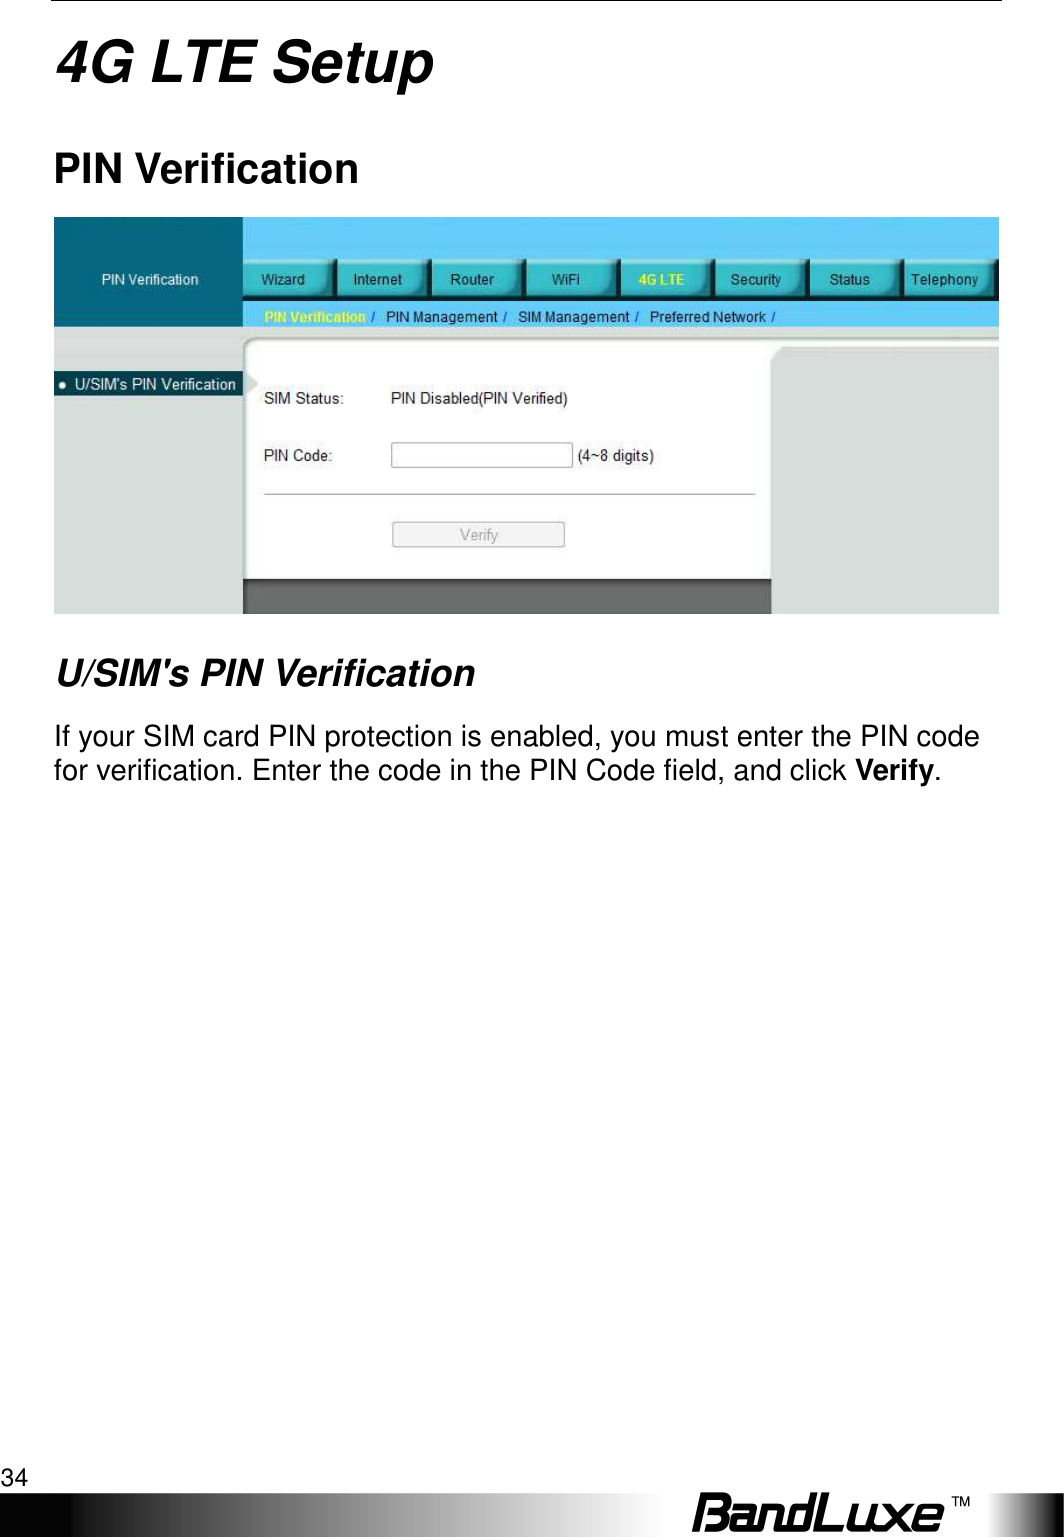 4G LTE Setup 34  4G LTE Setup PIN Verification  U/SIM&apos;s PIN Verification If your SIM card PIN protection is enabled, you must enter the PIN code for verification. Enter the code in the PIN Code field, and click Verify.    